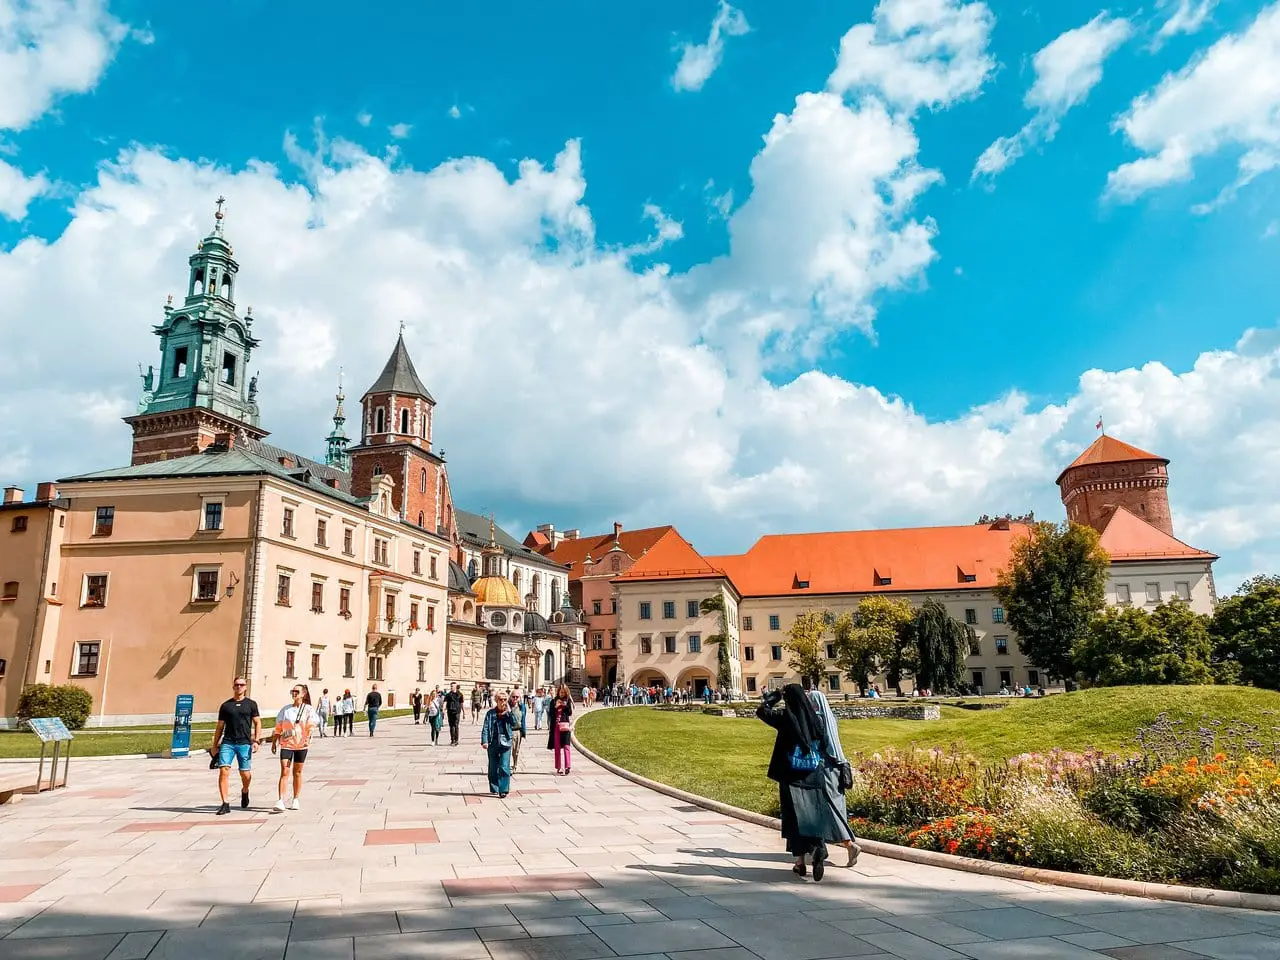 Wawel hill, one of the best places to visit for free in Krakow